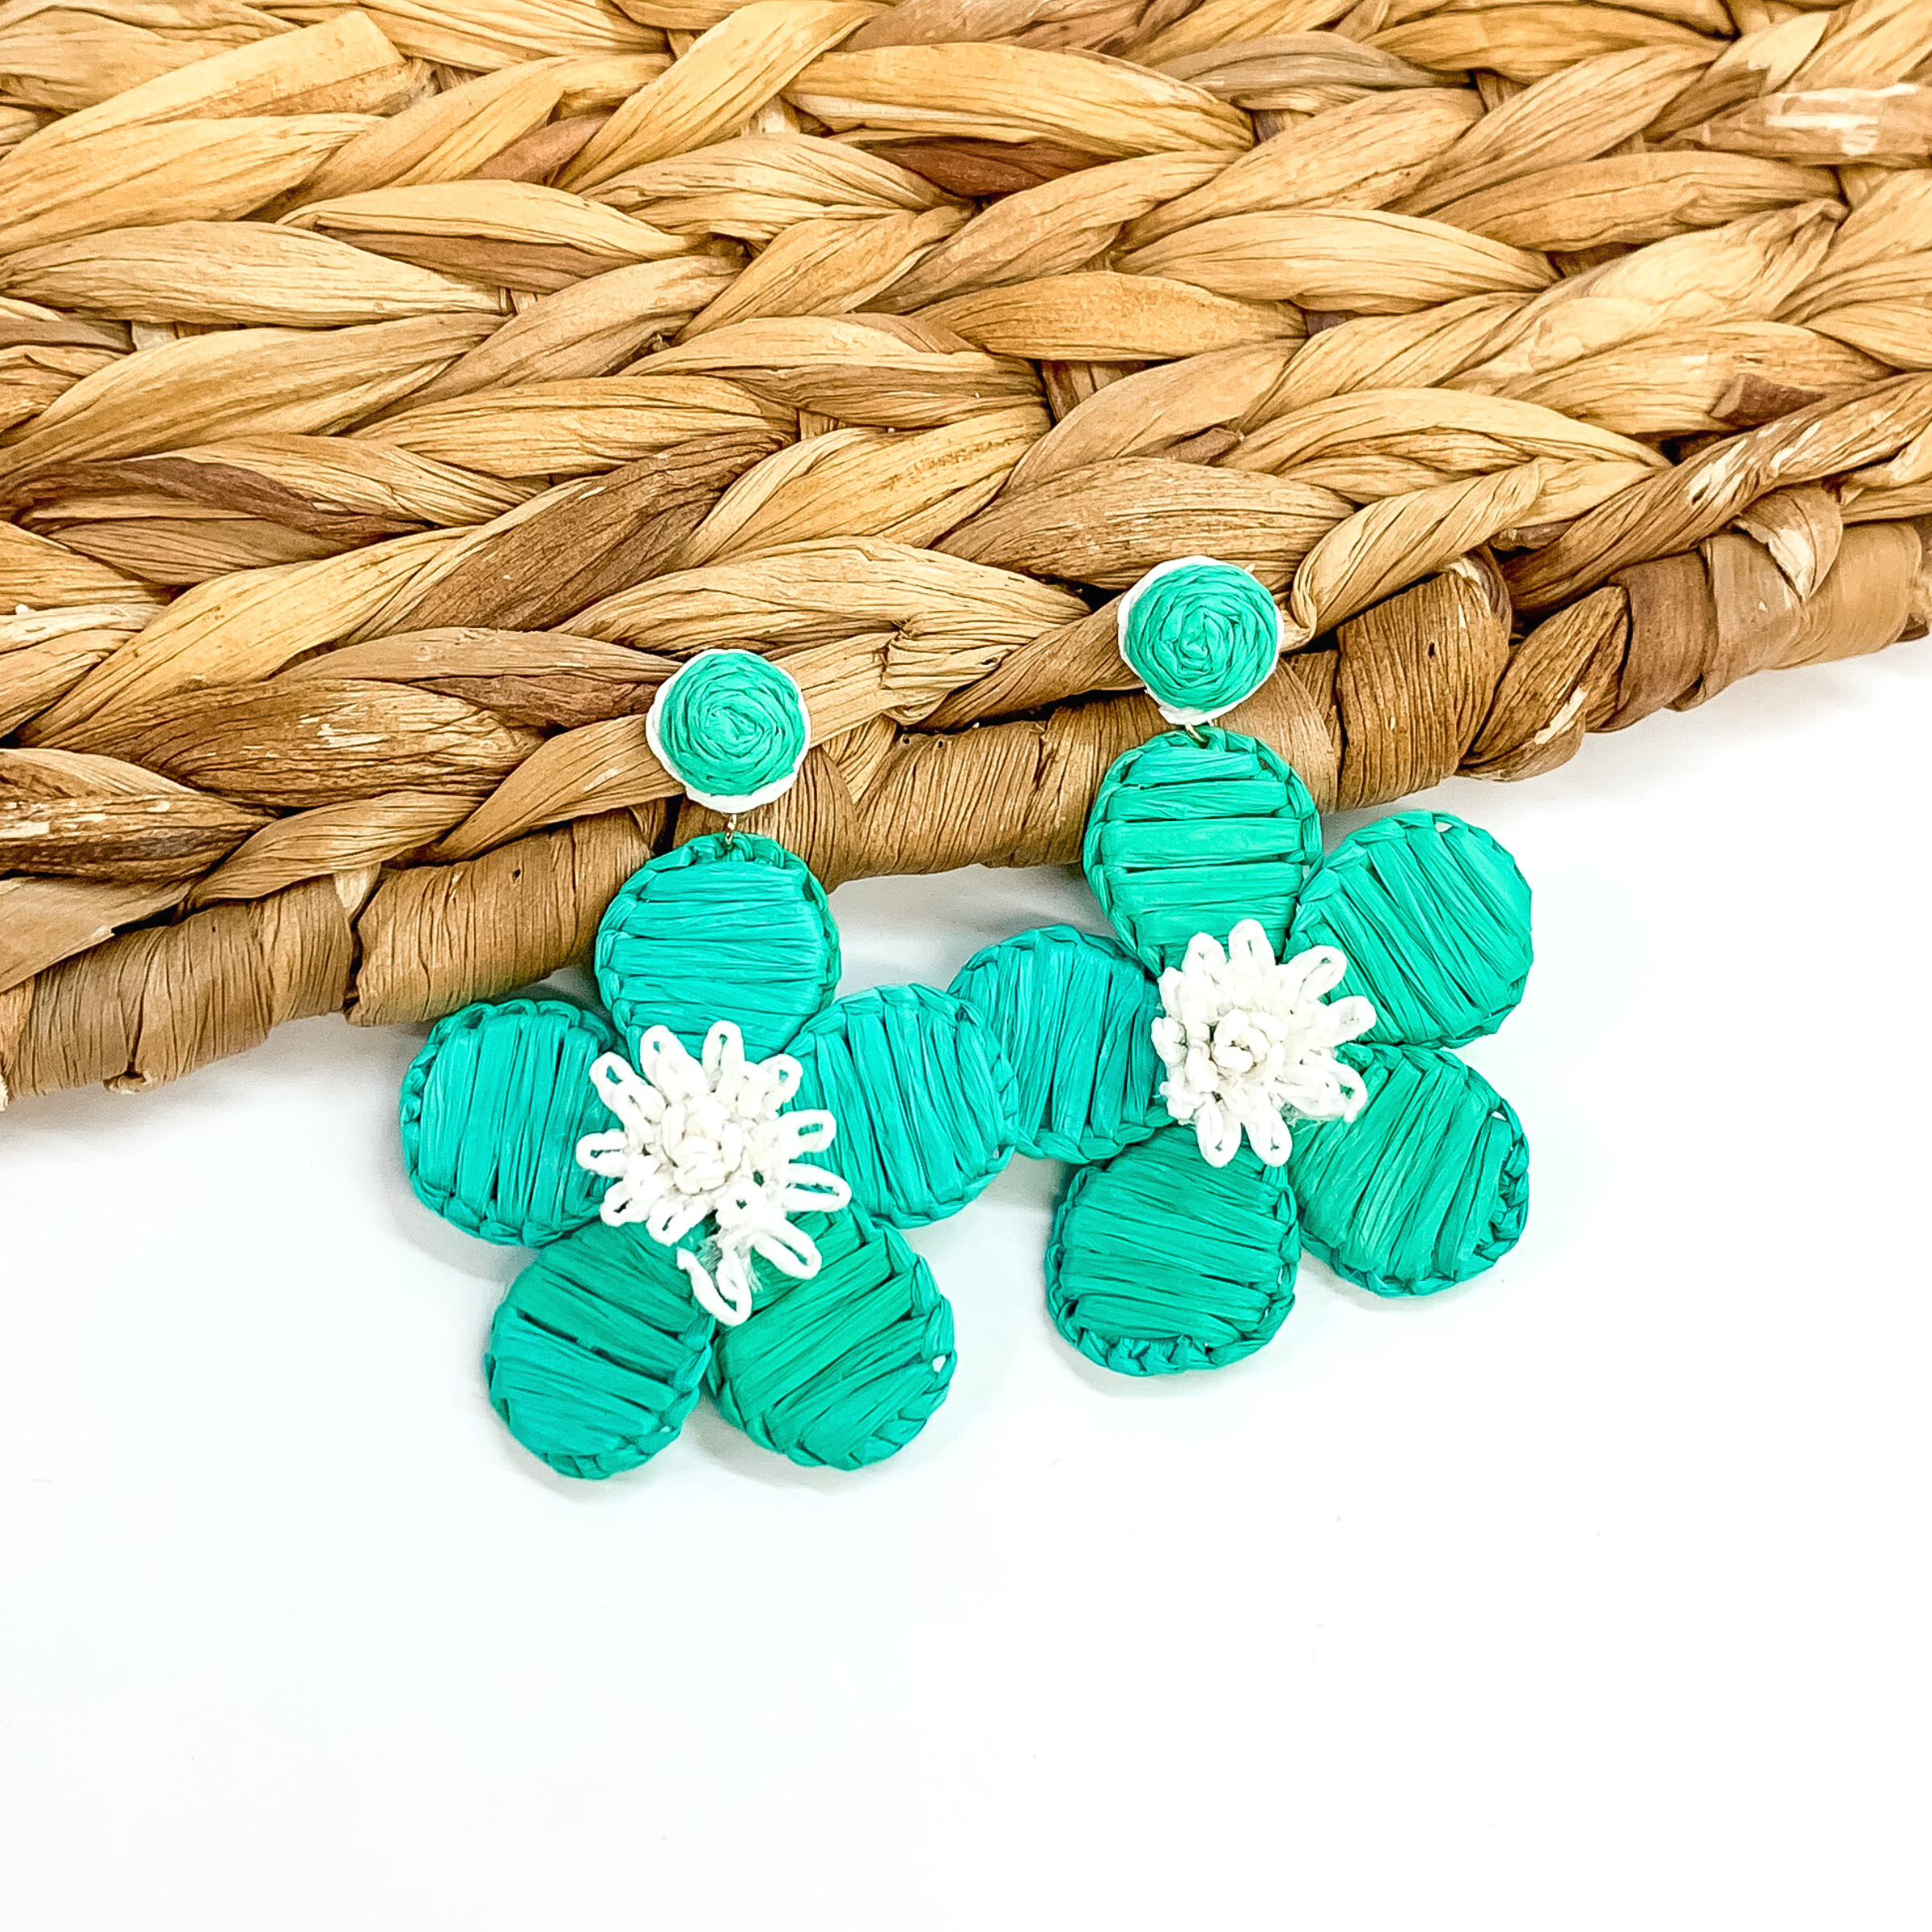 Turquoise raffia wrapped circle studs with hanging flower pendant wrapped in turquoise  raffia and white colored middle. These earrings are pictured partially laying on a basket weave material on a white background.